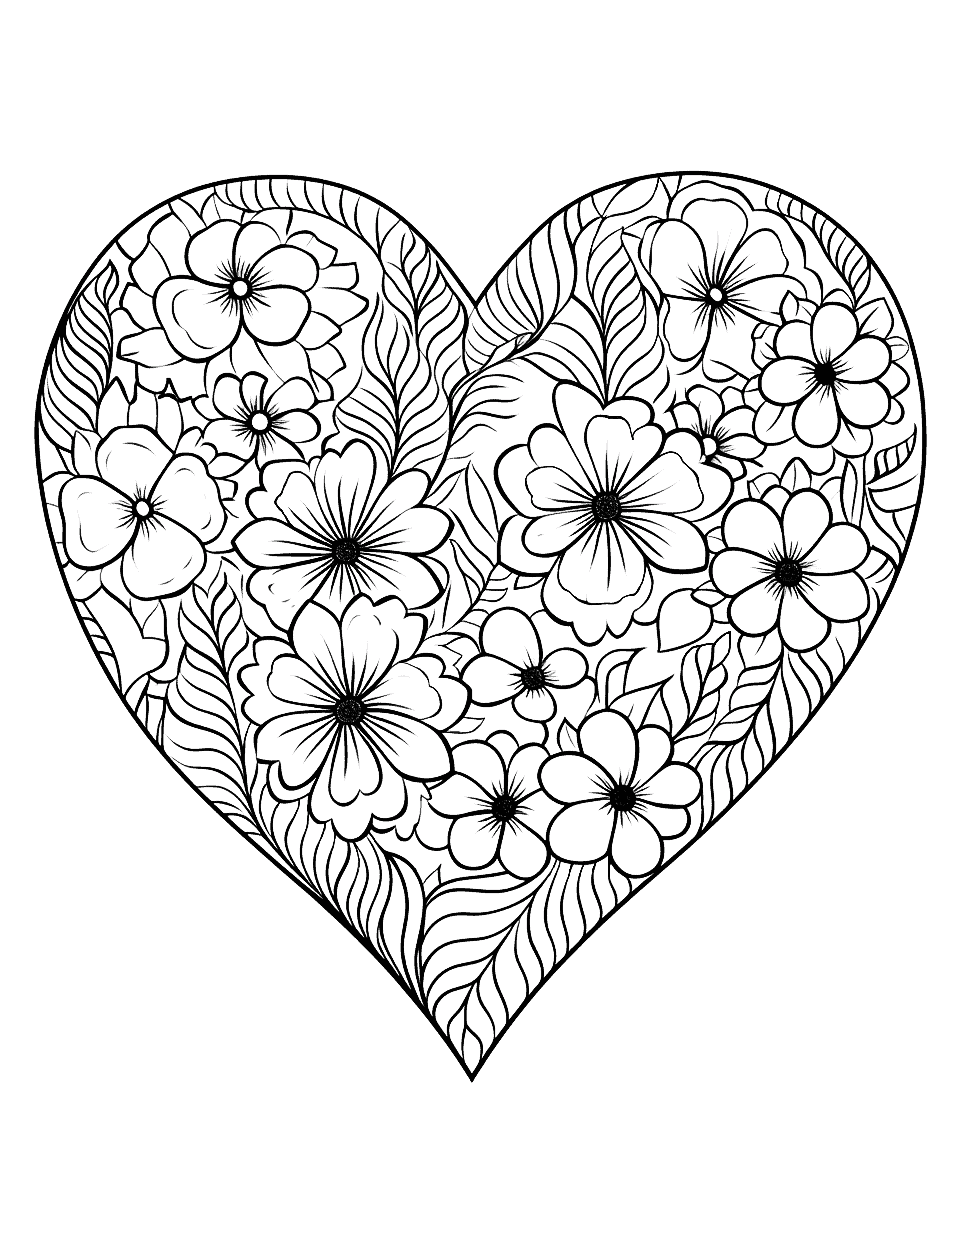 Floral Heart Wreath Coloring Page - A heart-shaped wreath made up of different types of flowers for coloring.